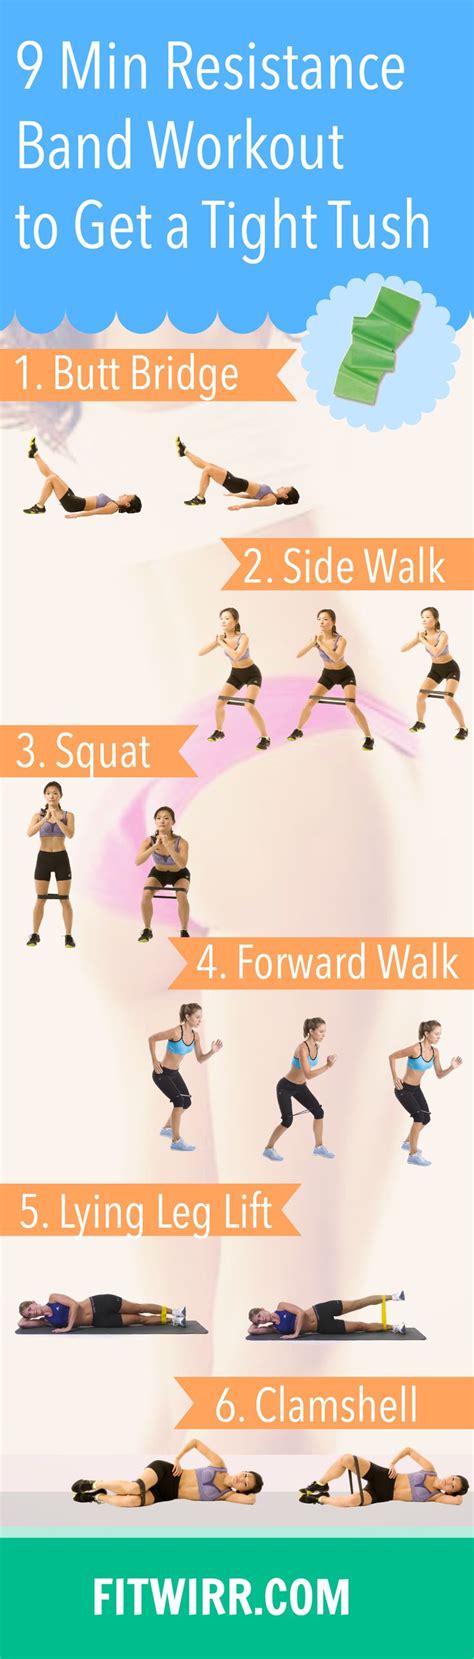 9 minute bikini workout with resistance band to get a